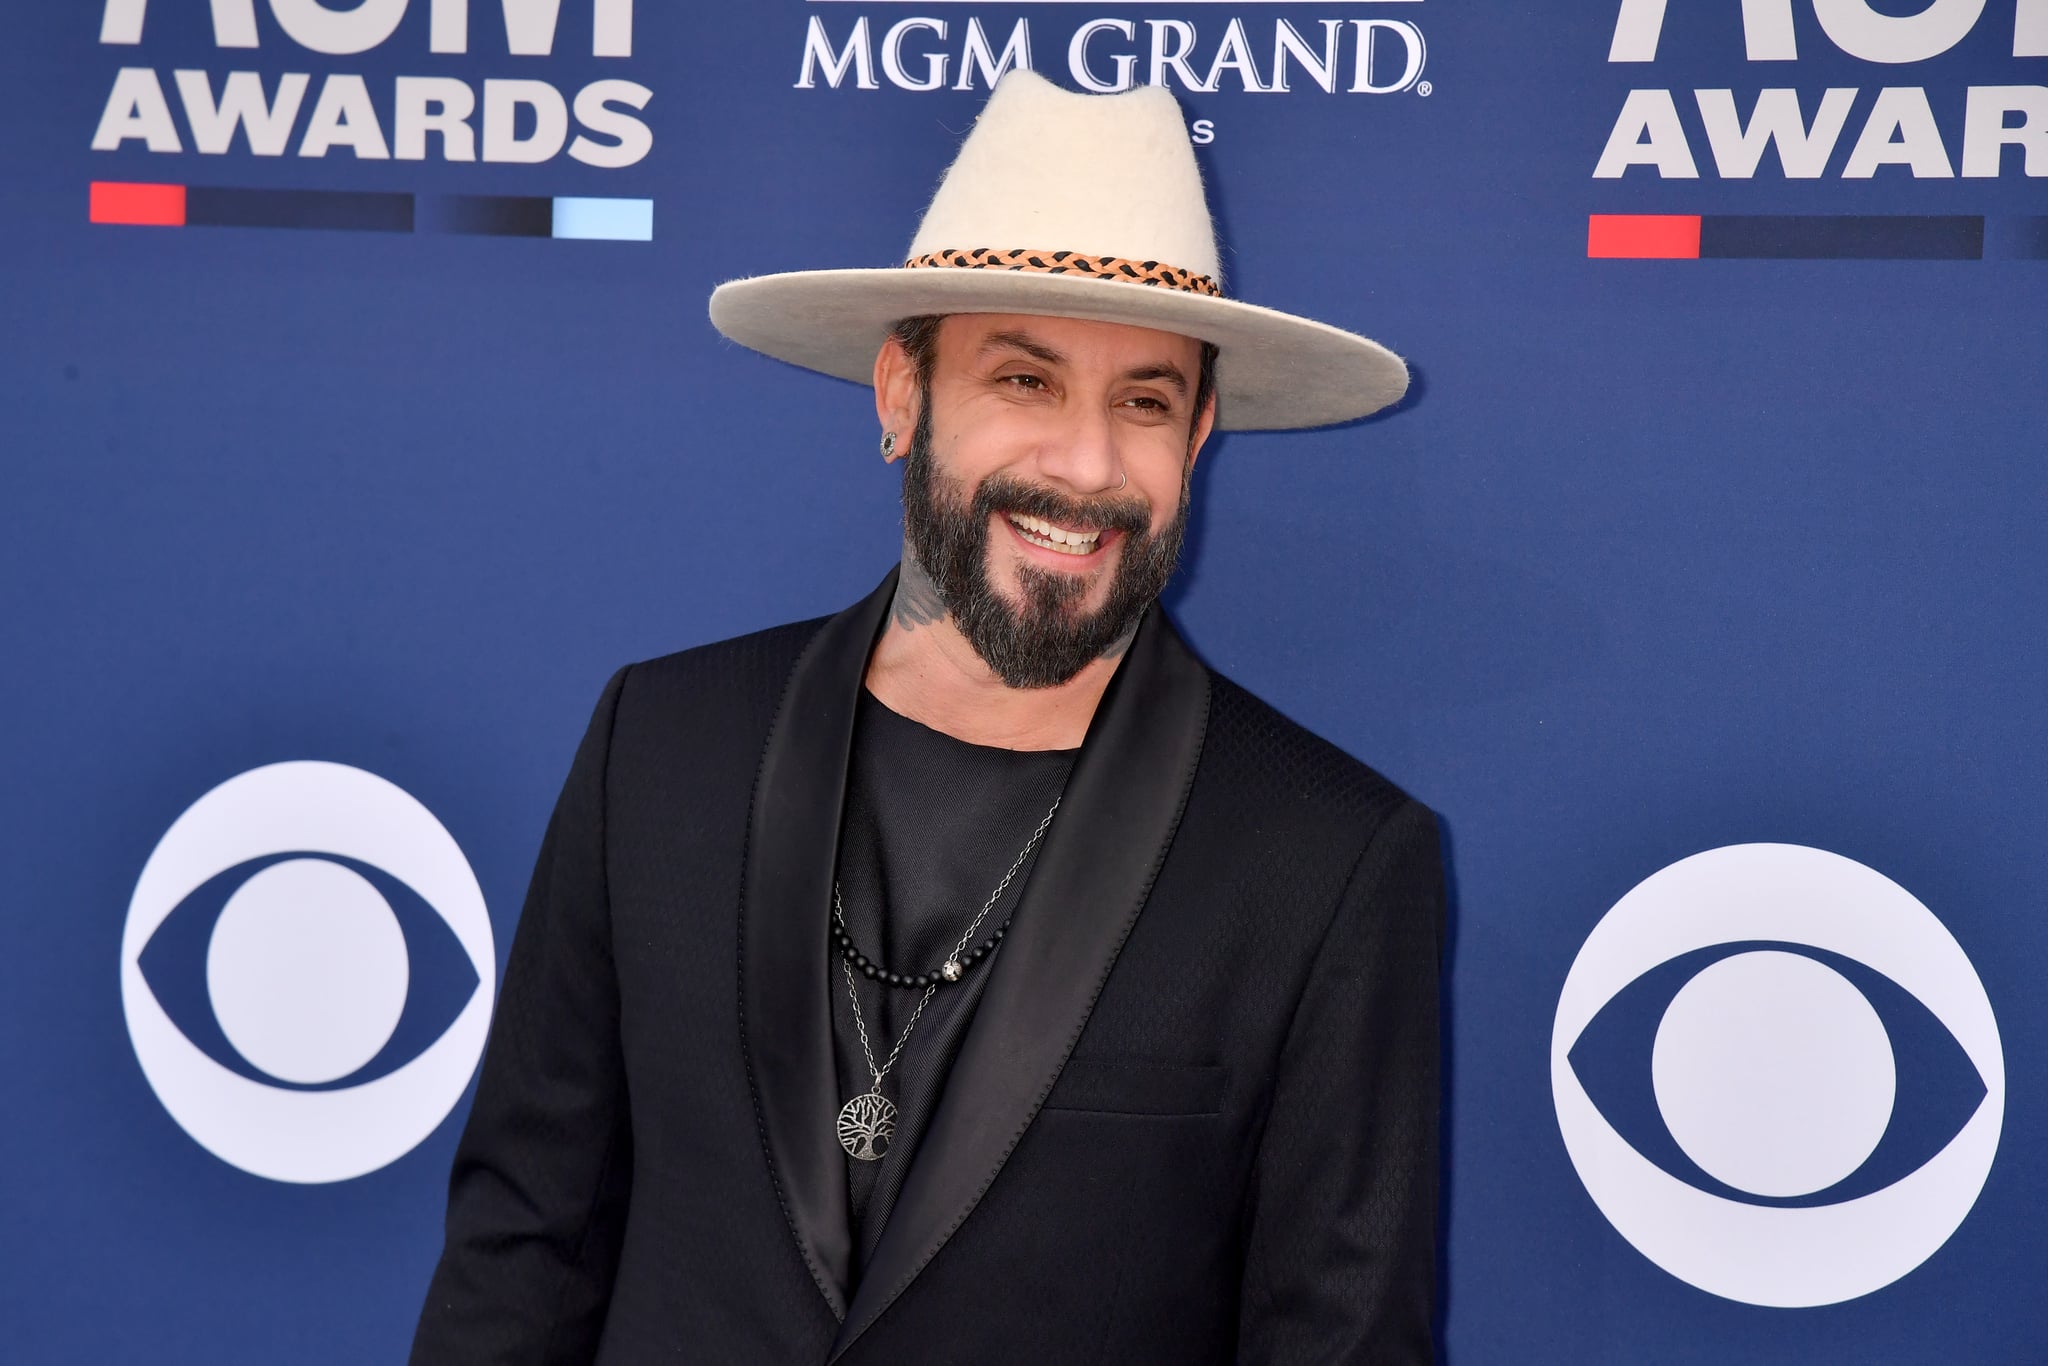 LAS VEGAS, NEVADA - APRIL 07: AJ McLean attends the 54th Academy Of Country Music Awards at MGM Grand Hotel & Casino on April 07, 2019 in Las Vegas, Nevada. (Photo by Jeff Kravitz/FilmMagic)